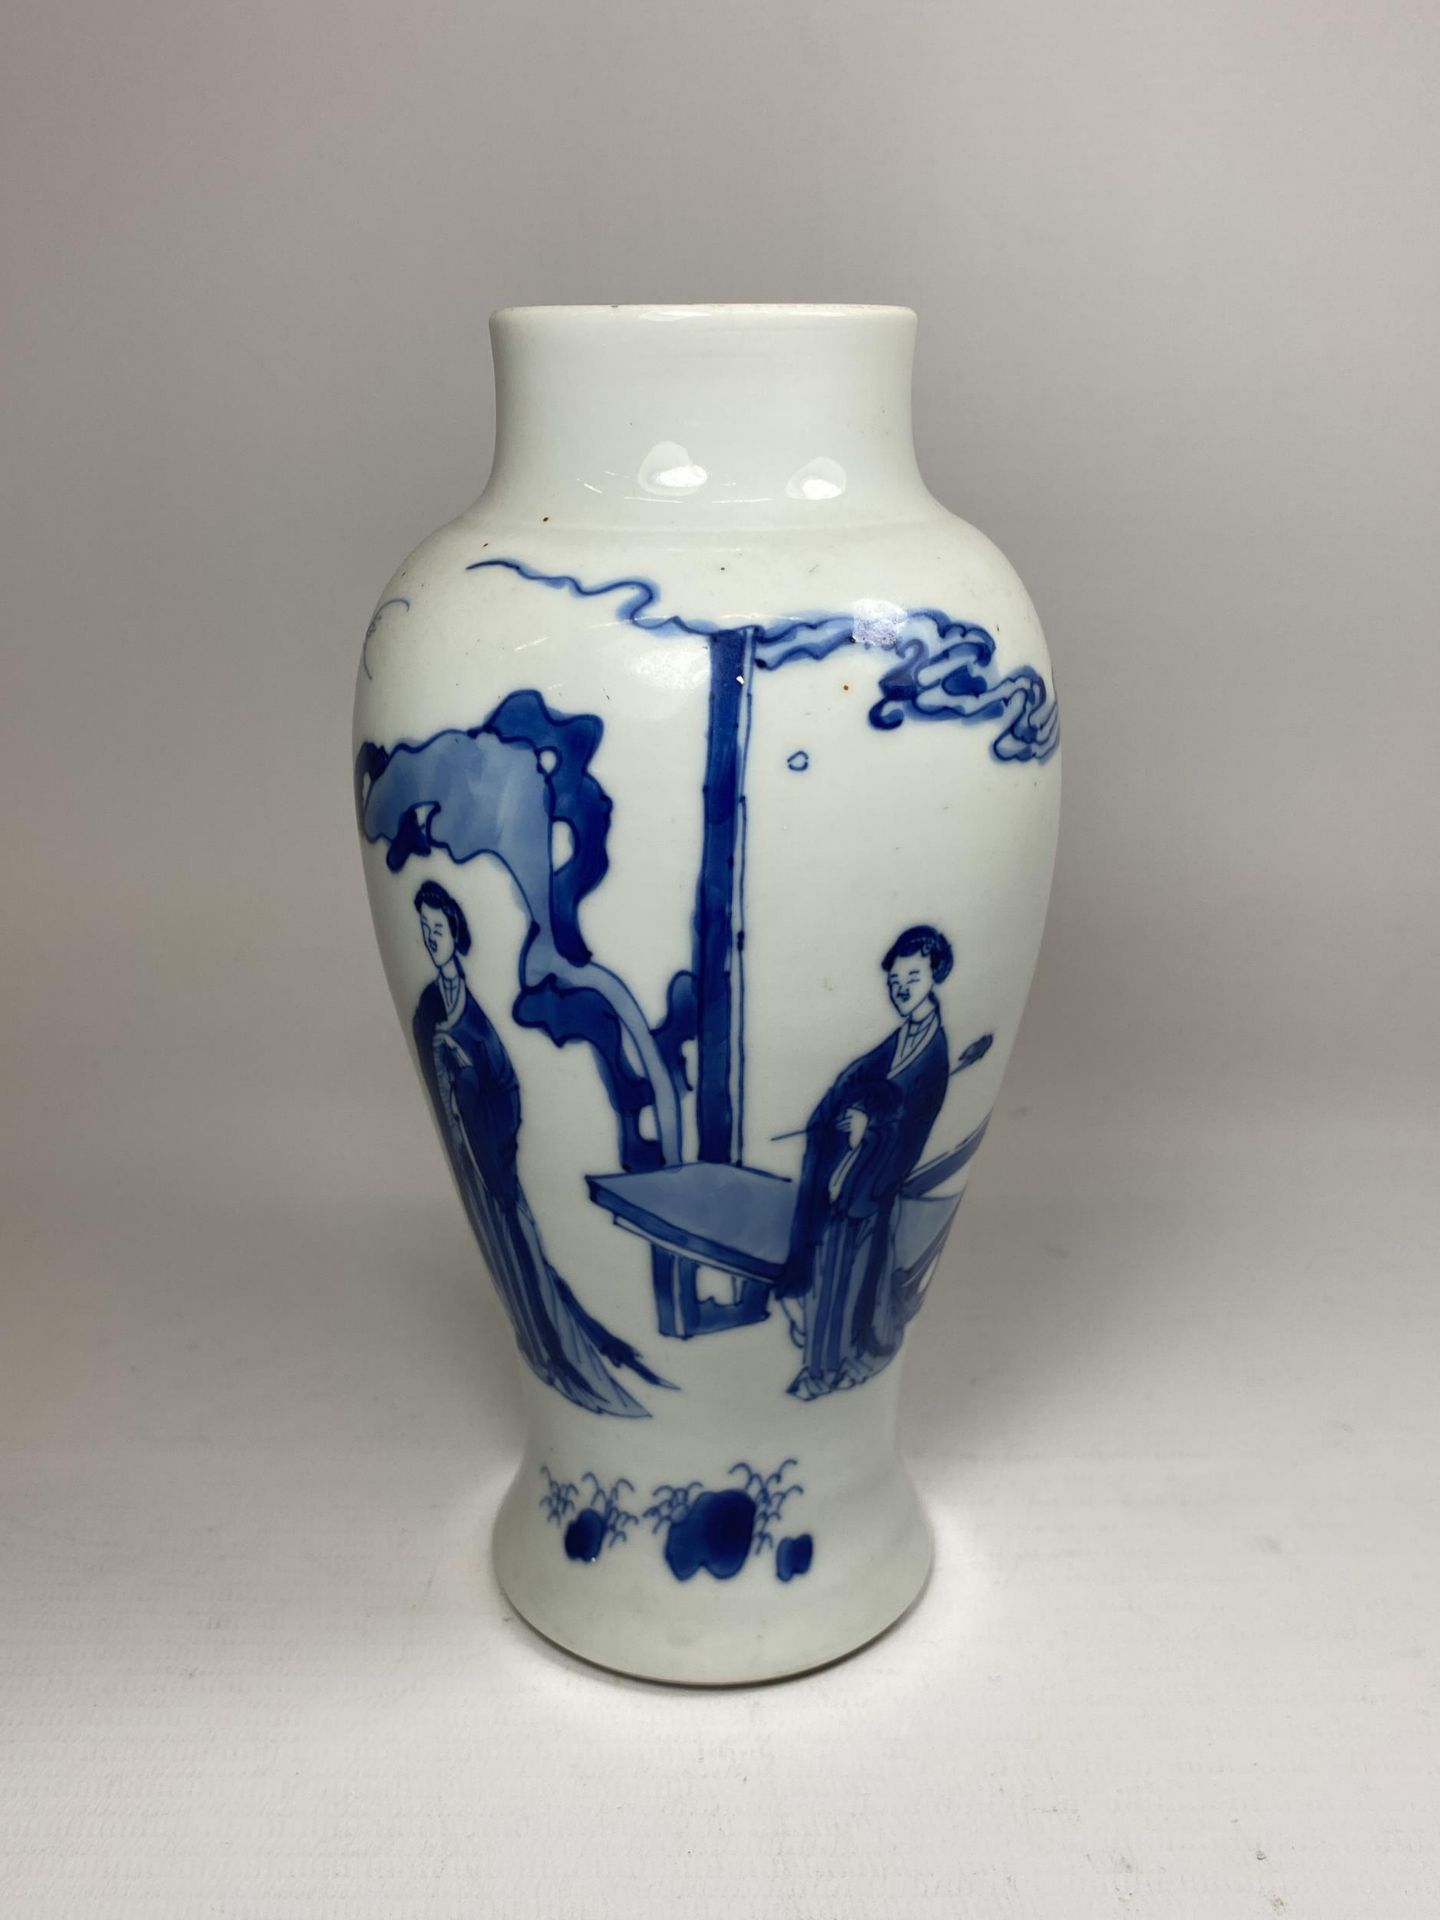 A CHINESE KANGXI PERIOD (1661-1722) BLUE AND WHITE PORCELAIN BALUSTER FORM VASE DEPICTING FIGURES IN